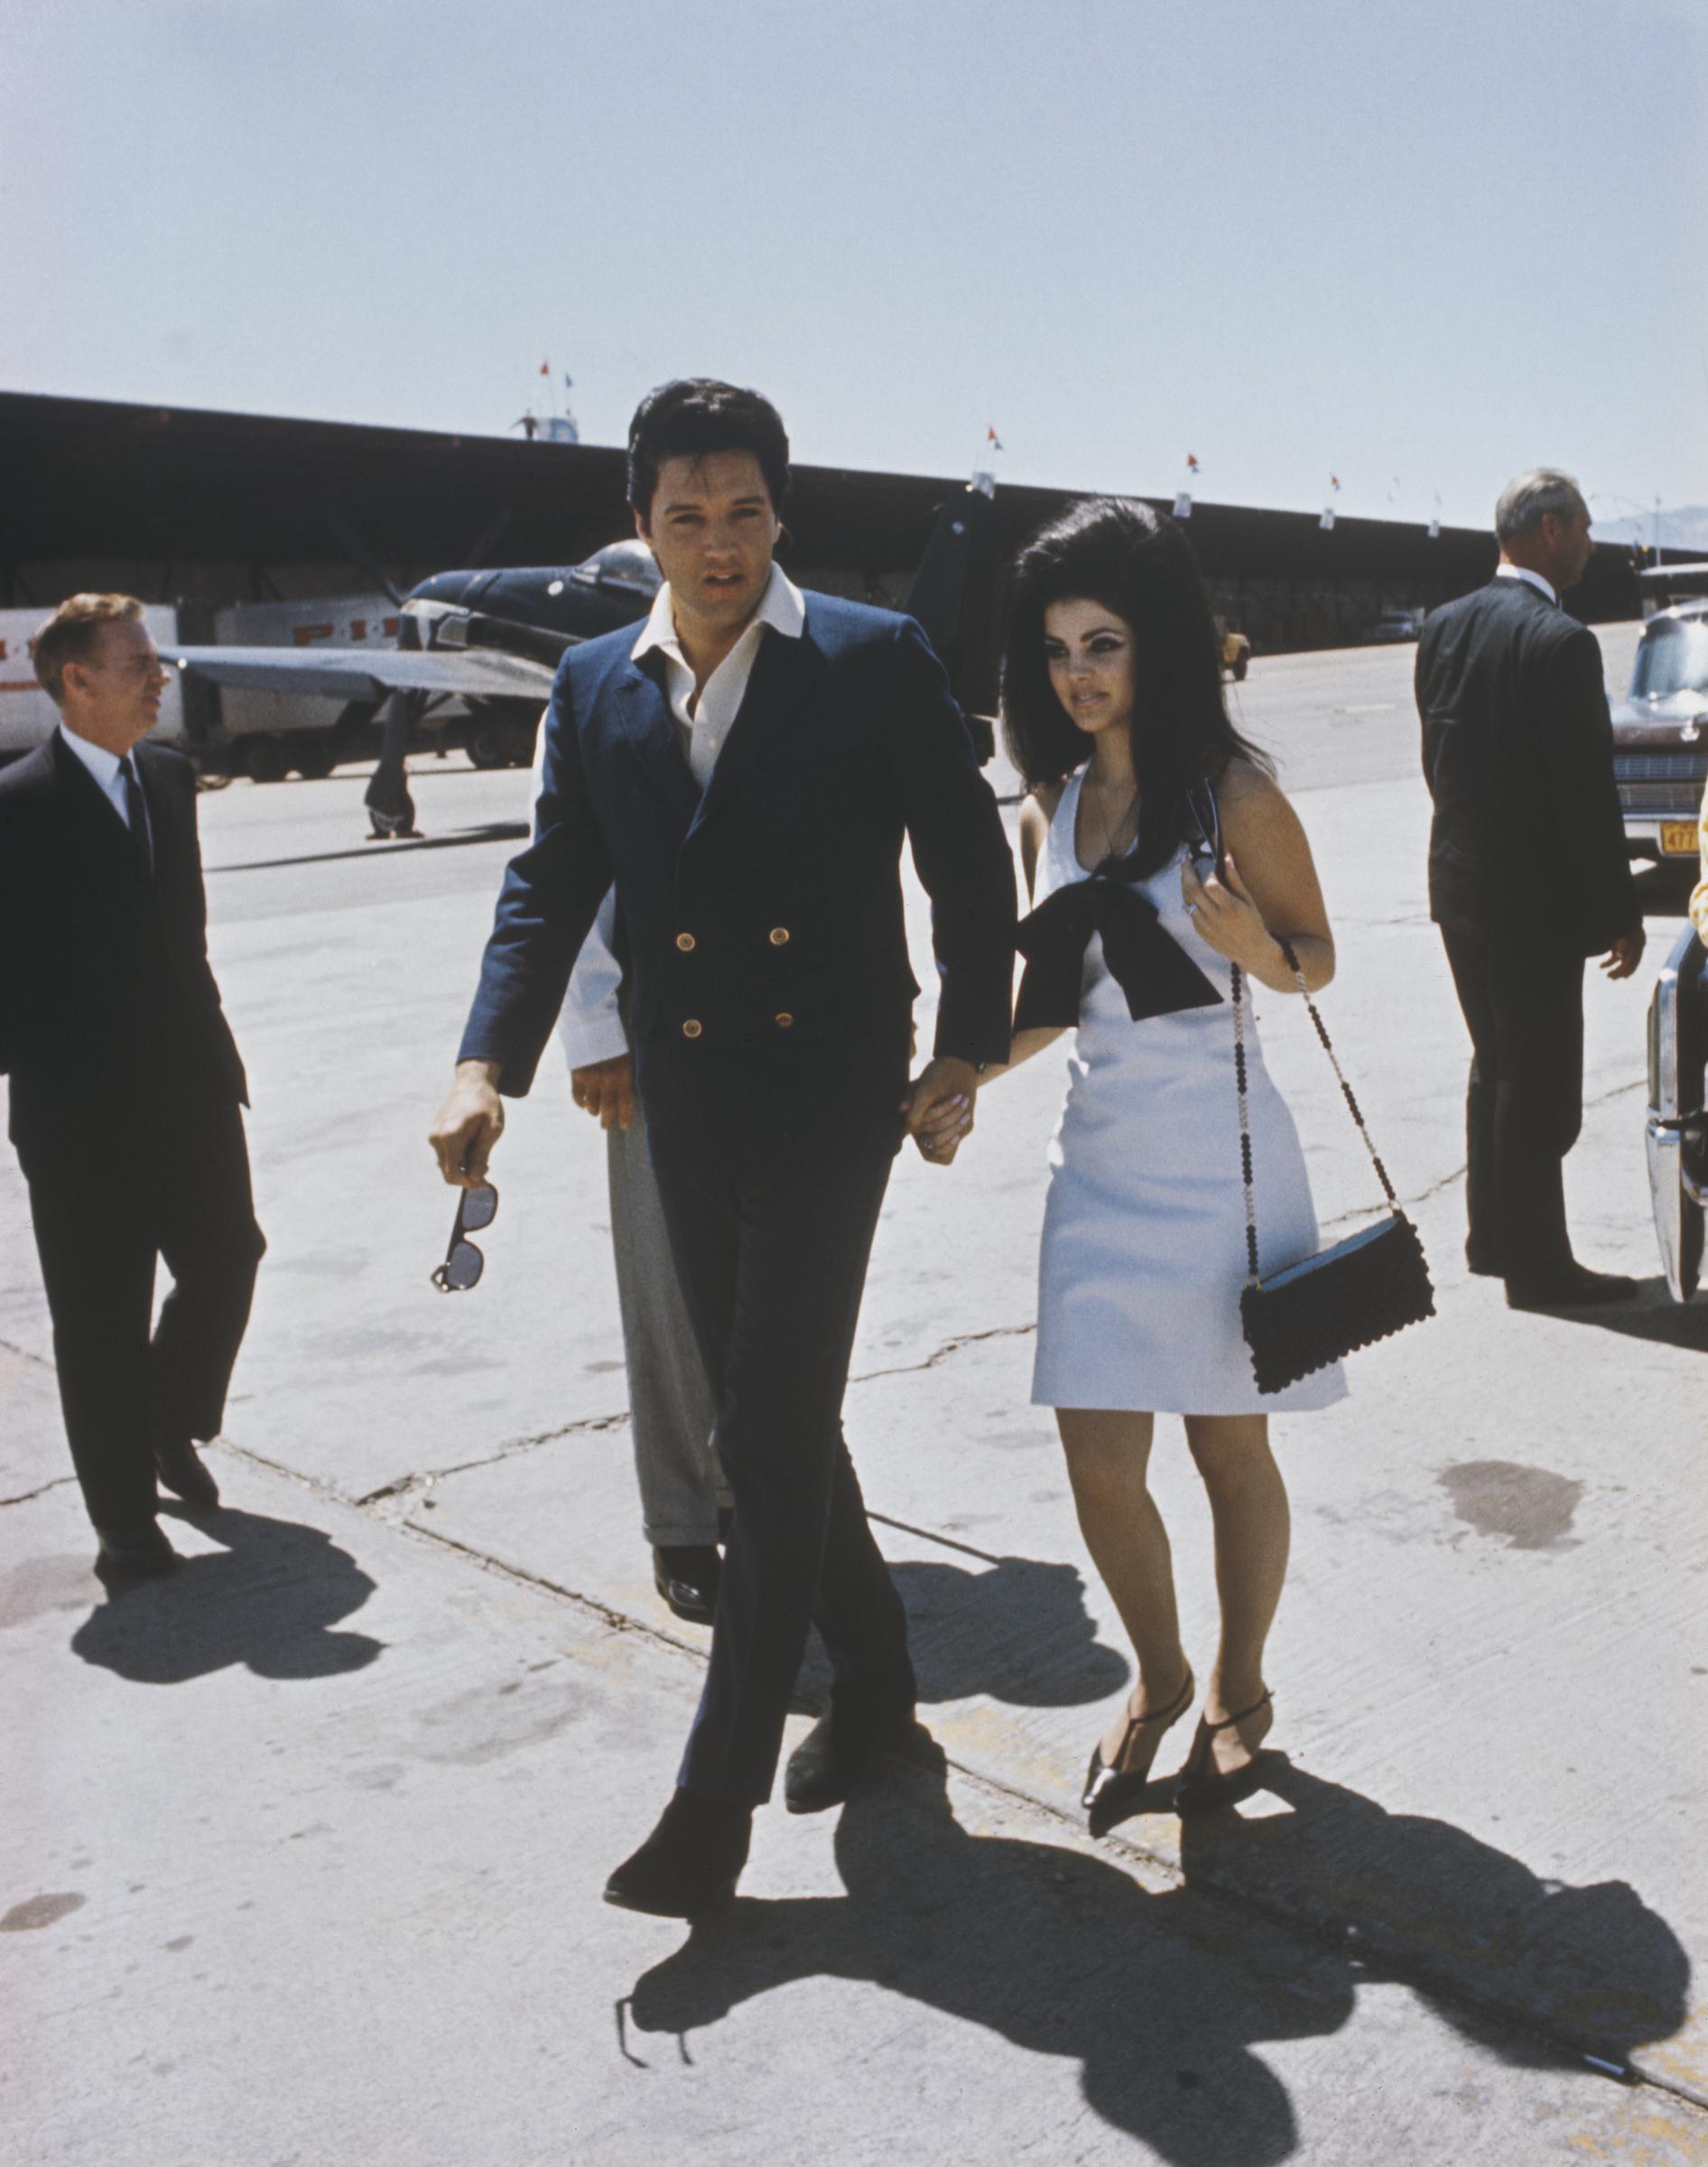 Elvis and Priscilla Presley seen at an airport during their honeymoon journey from Las Vegas, Nevada to Palm Springs, California on May 1, 1967 | Source: Getty Images